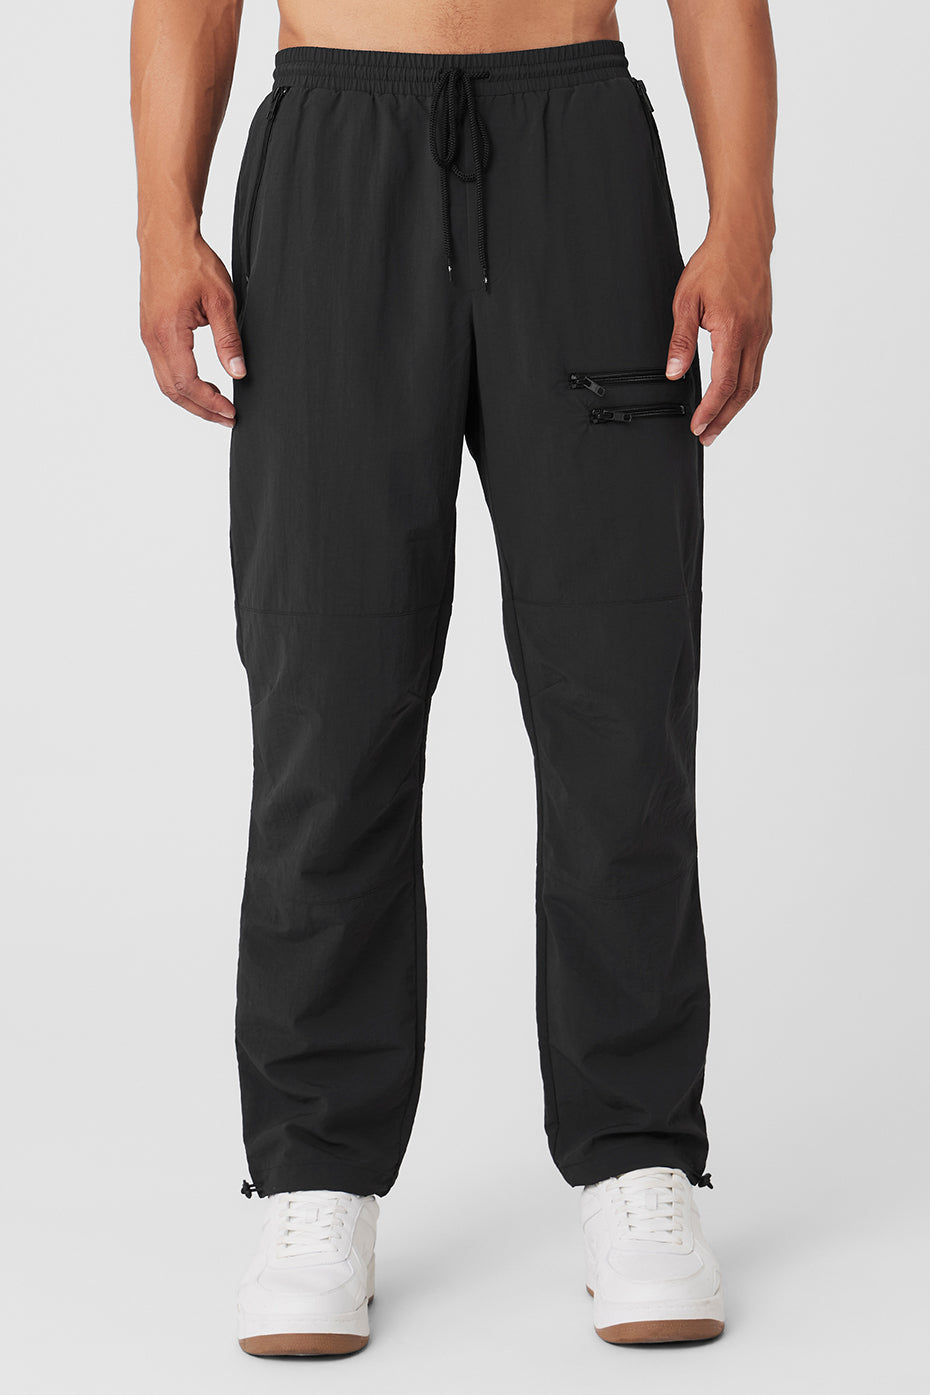 Shop Alo Yoga Stability 2-in-1 Layered Pant